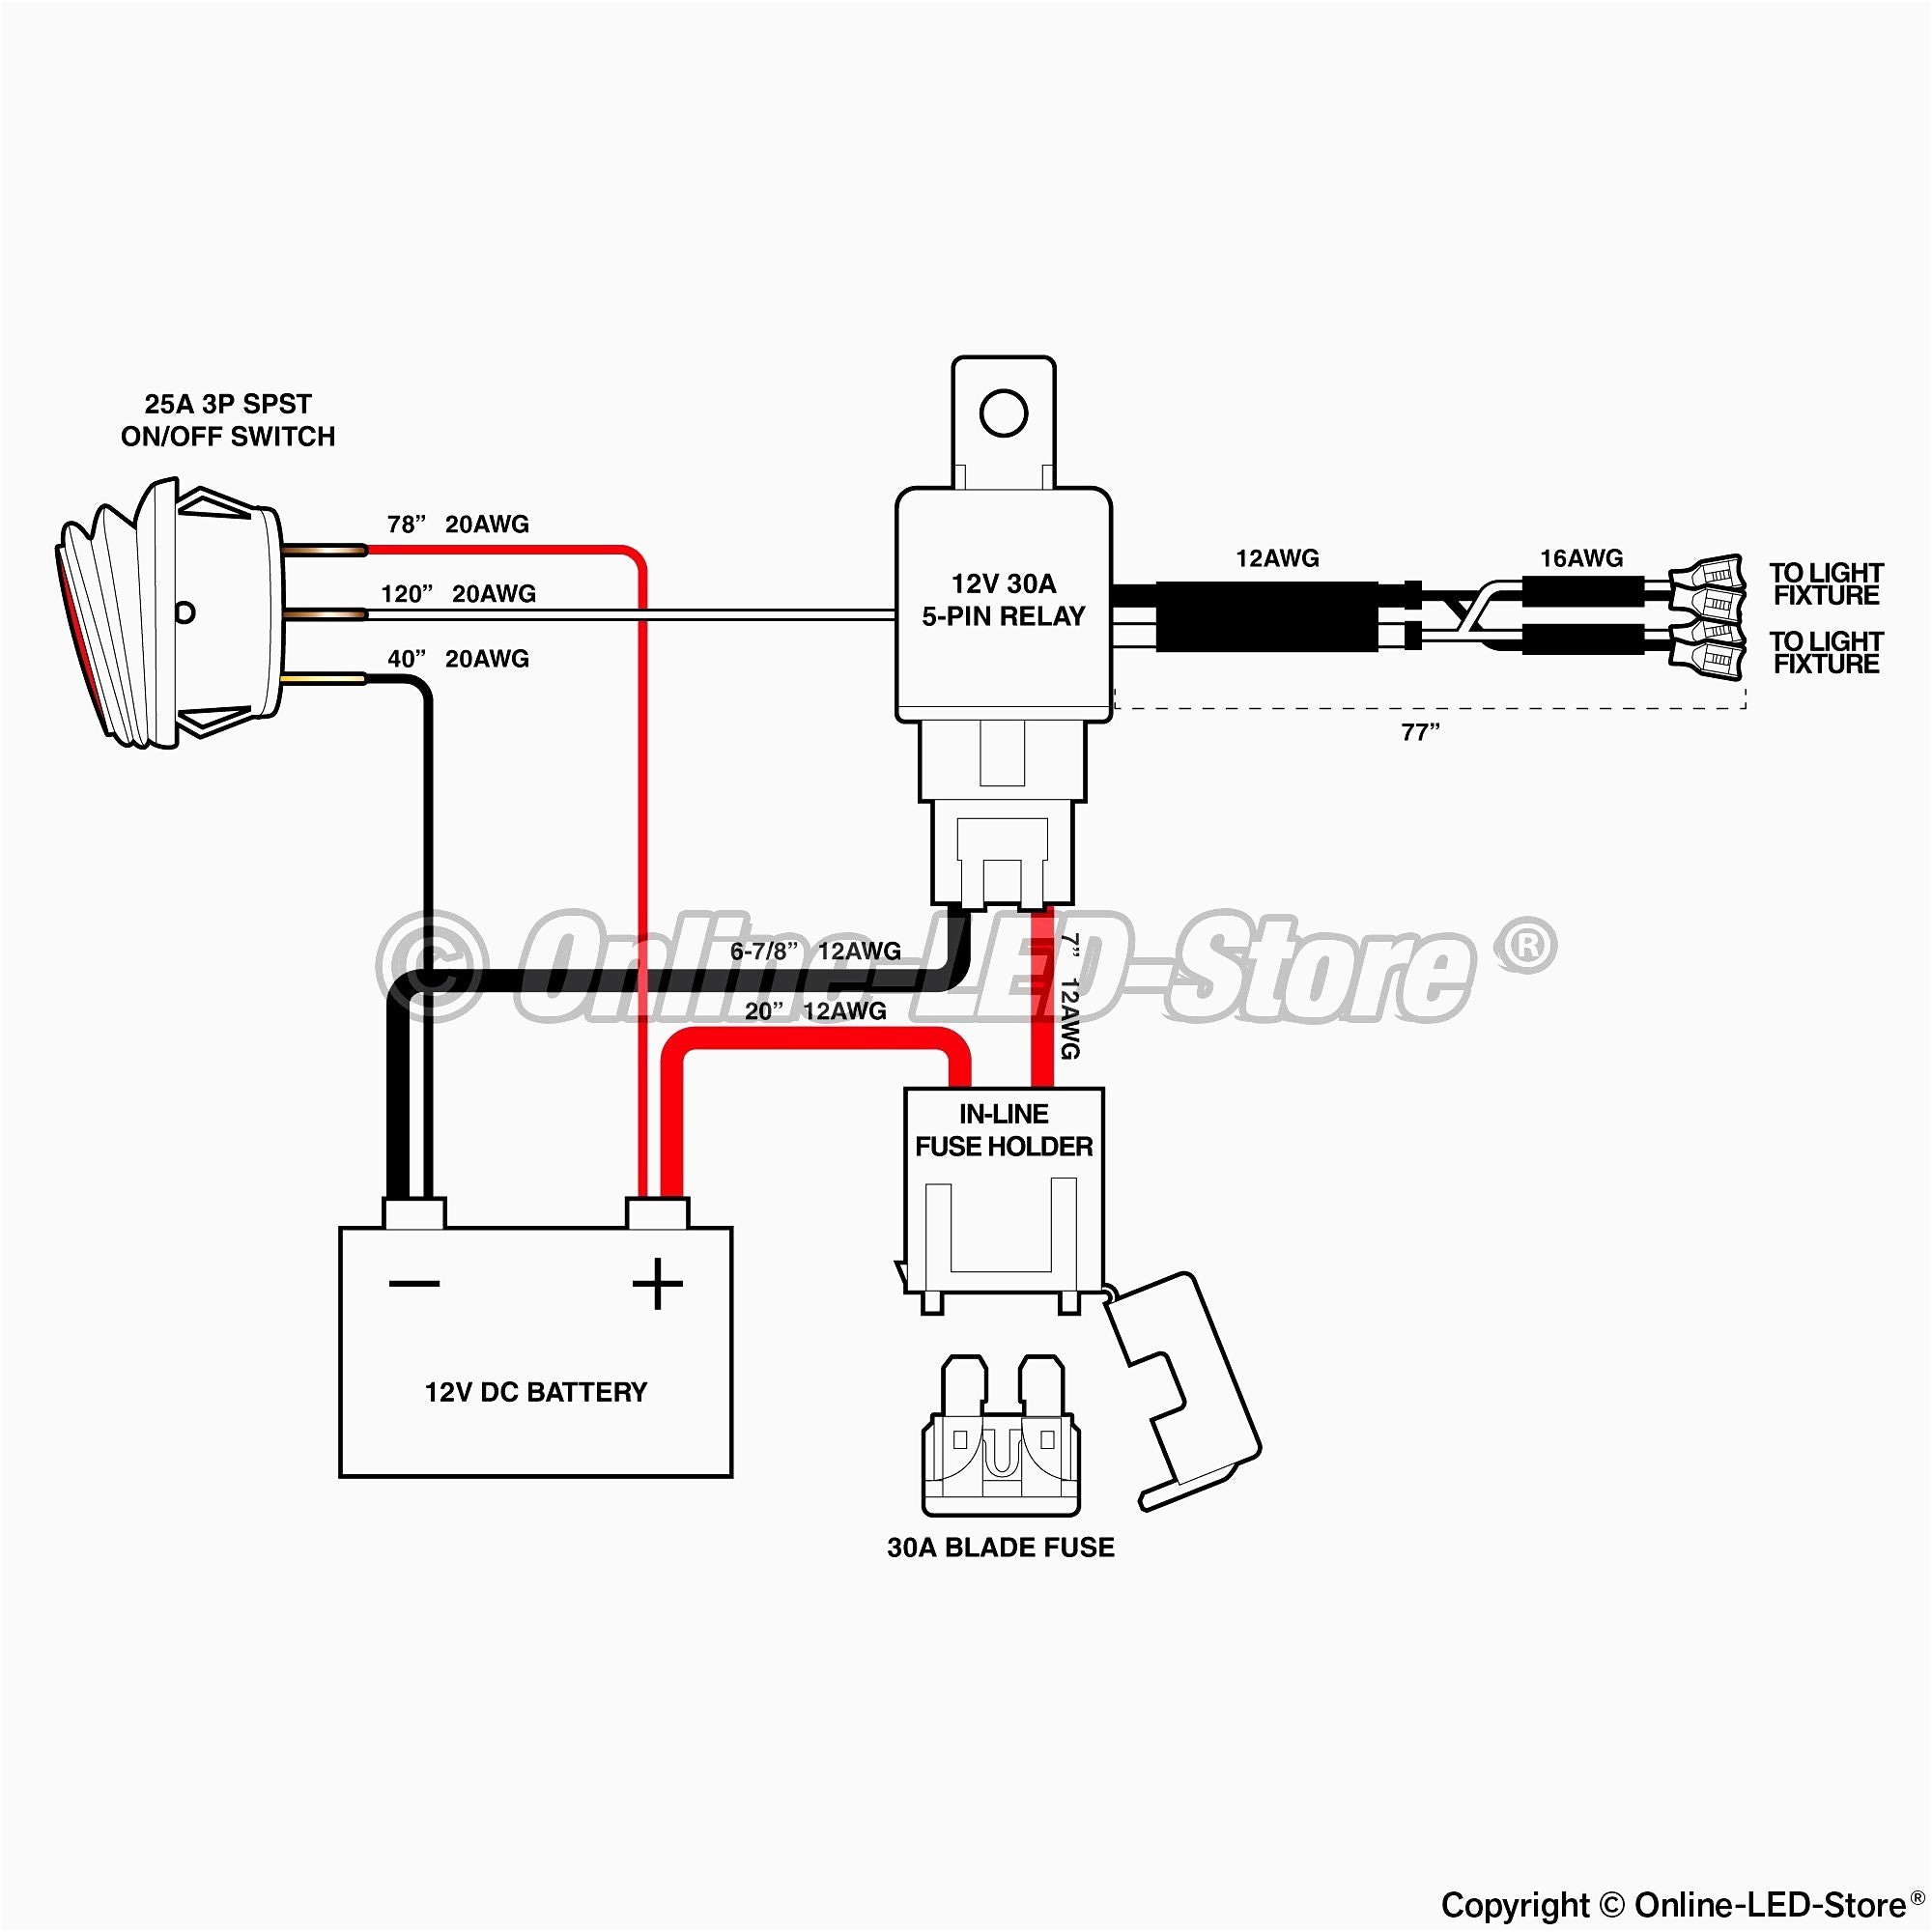 12 Volt Relay Wiring Diagram Beautiful 12 Volt Relay Wiring Diagram & Posted Image"